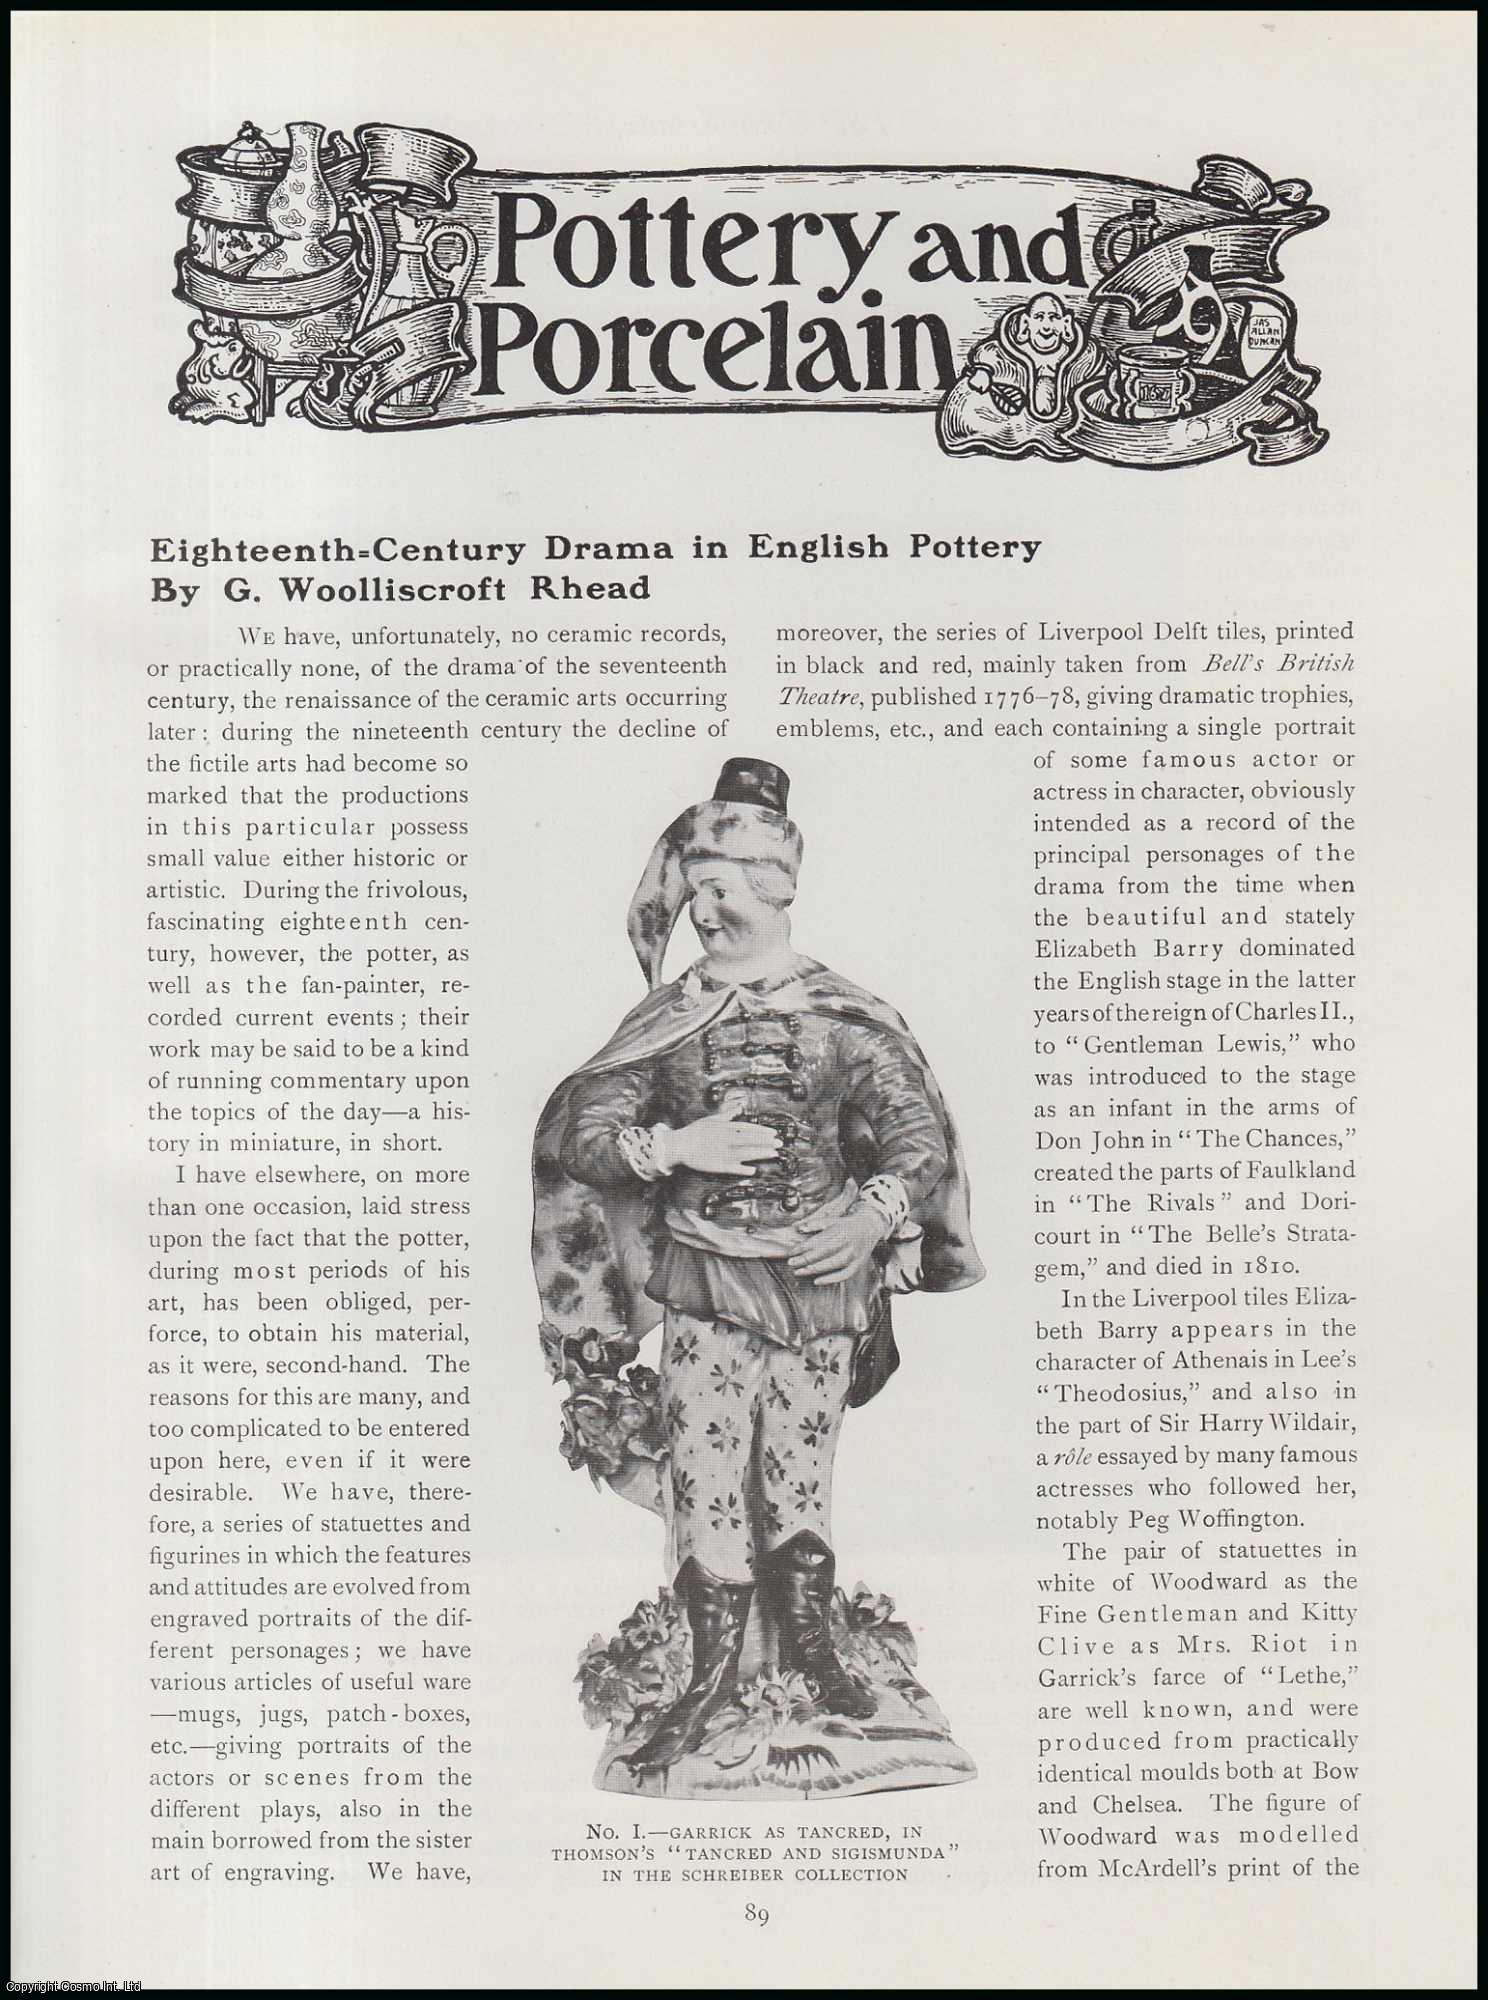 G. Woolliscroft Rhead - Eighteenth-Century Drama in English Pottery. An original article from The Connoisseur, 1916.